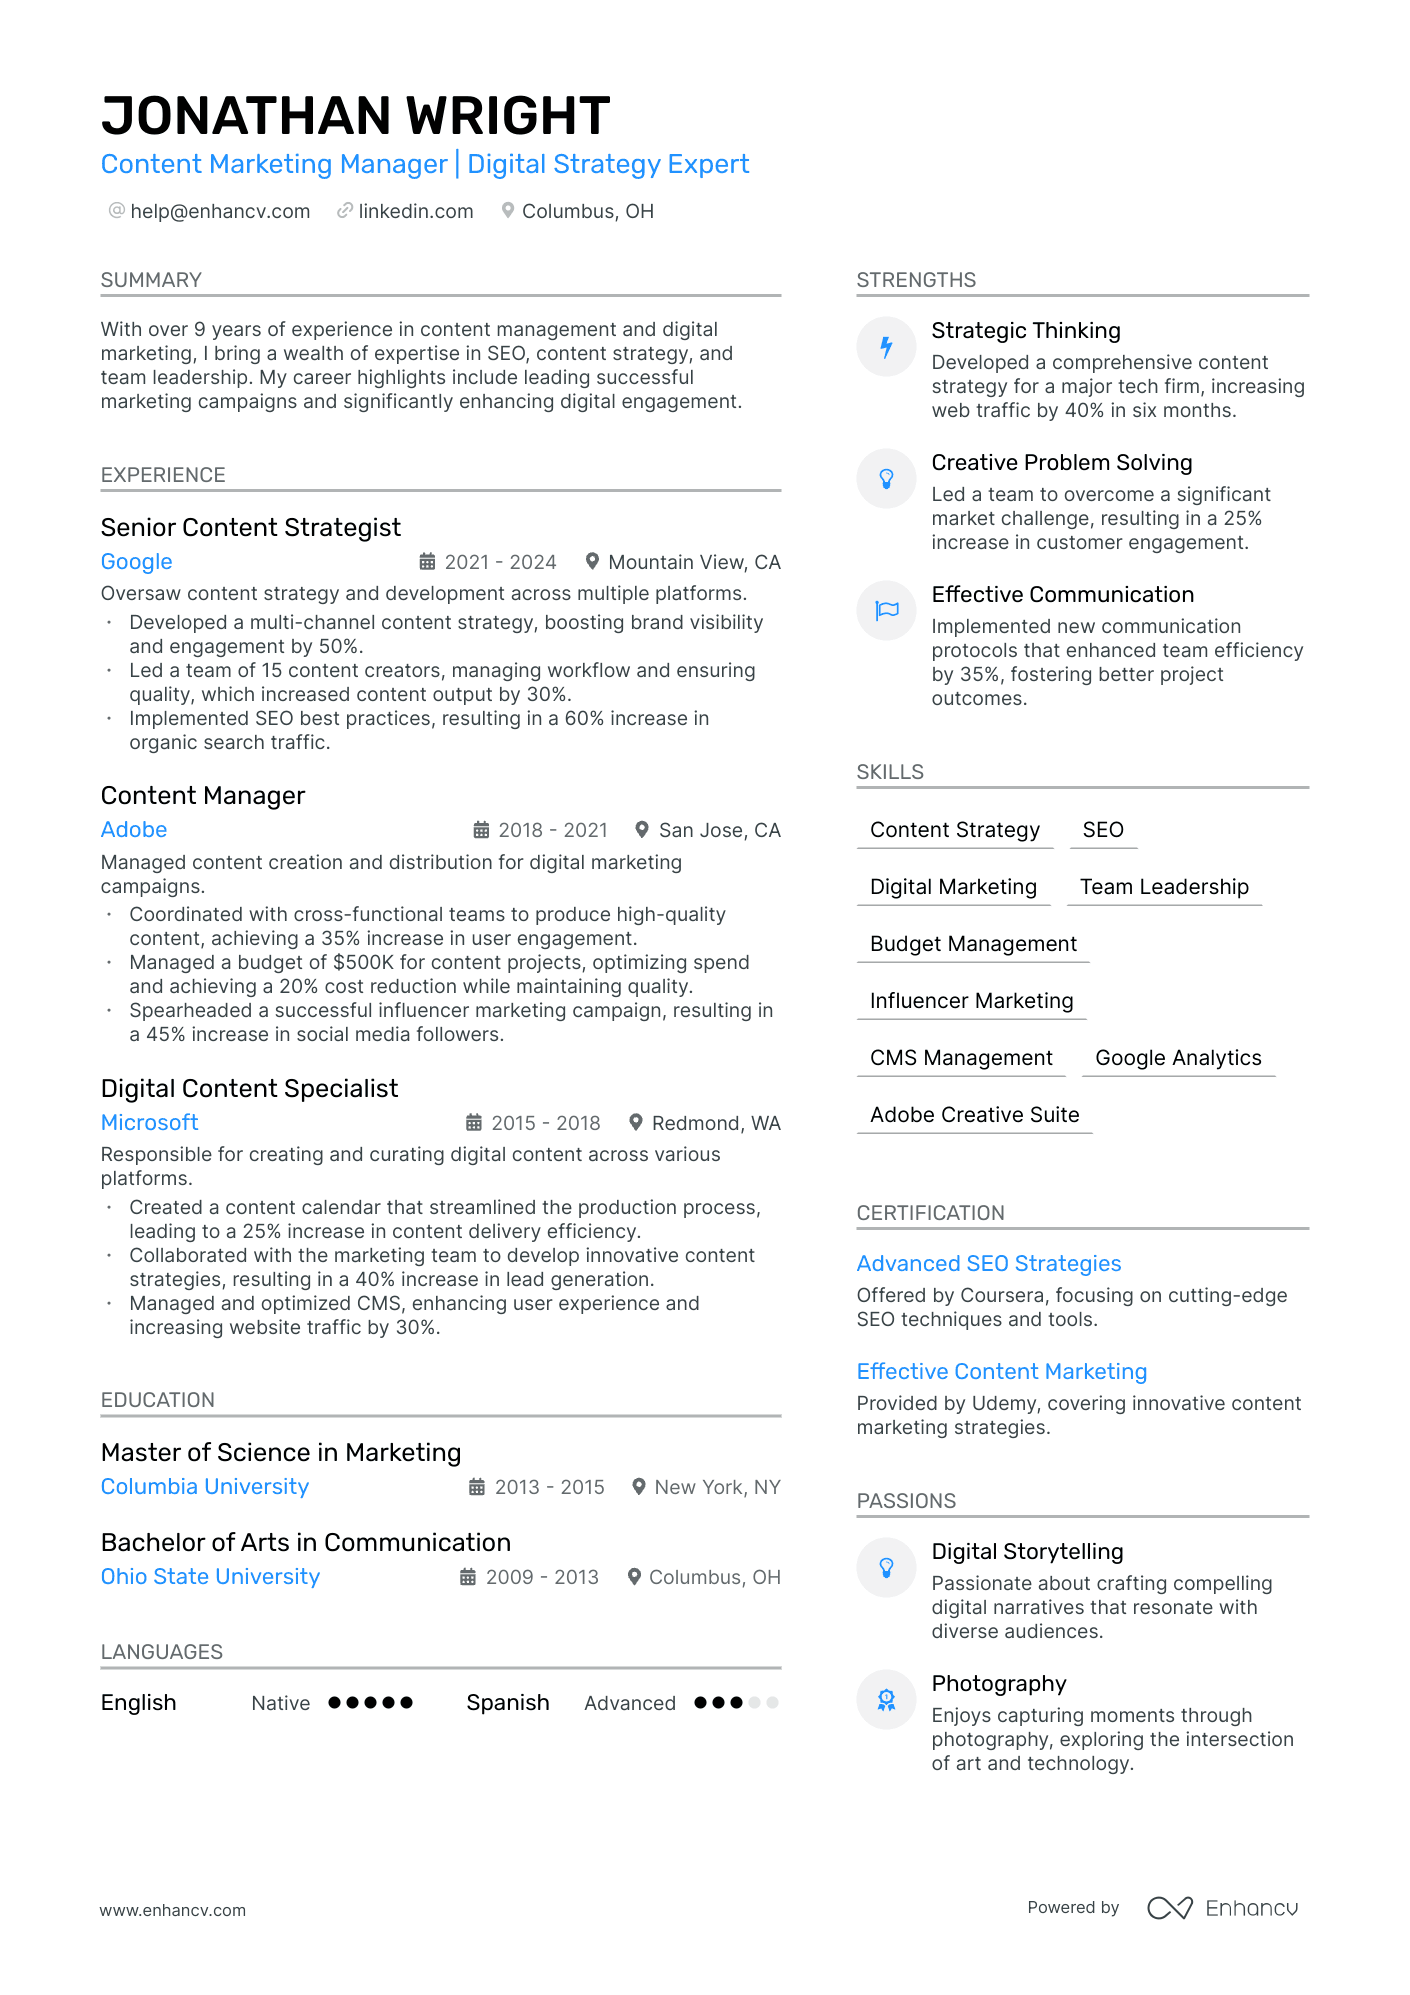 Content Manager resume example